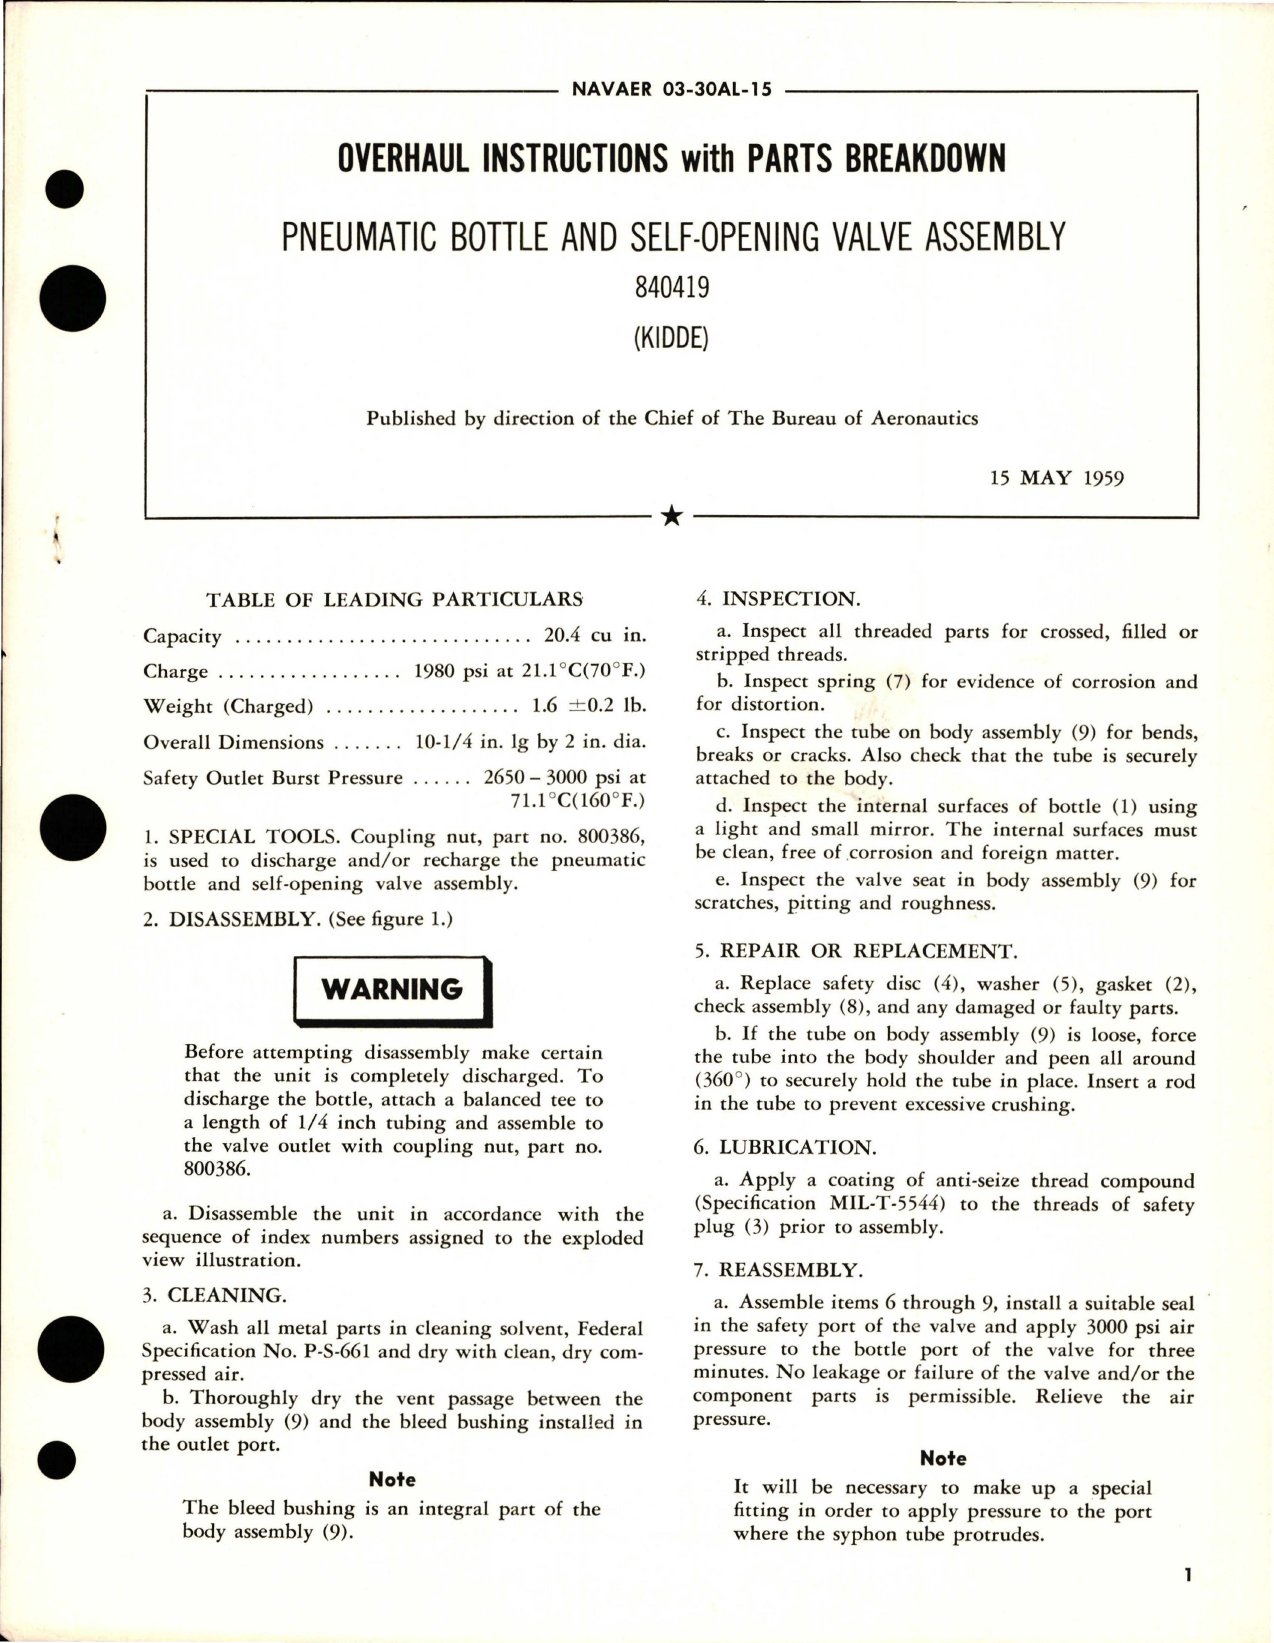 Sample page 1 from AirCorps Library document: Overhaul Instructions with Parts Breakdown for Pneumatic Bottle and Self Opening Valve Assembly - 840419 